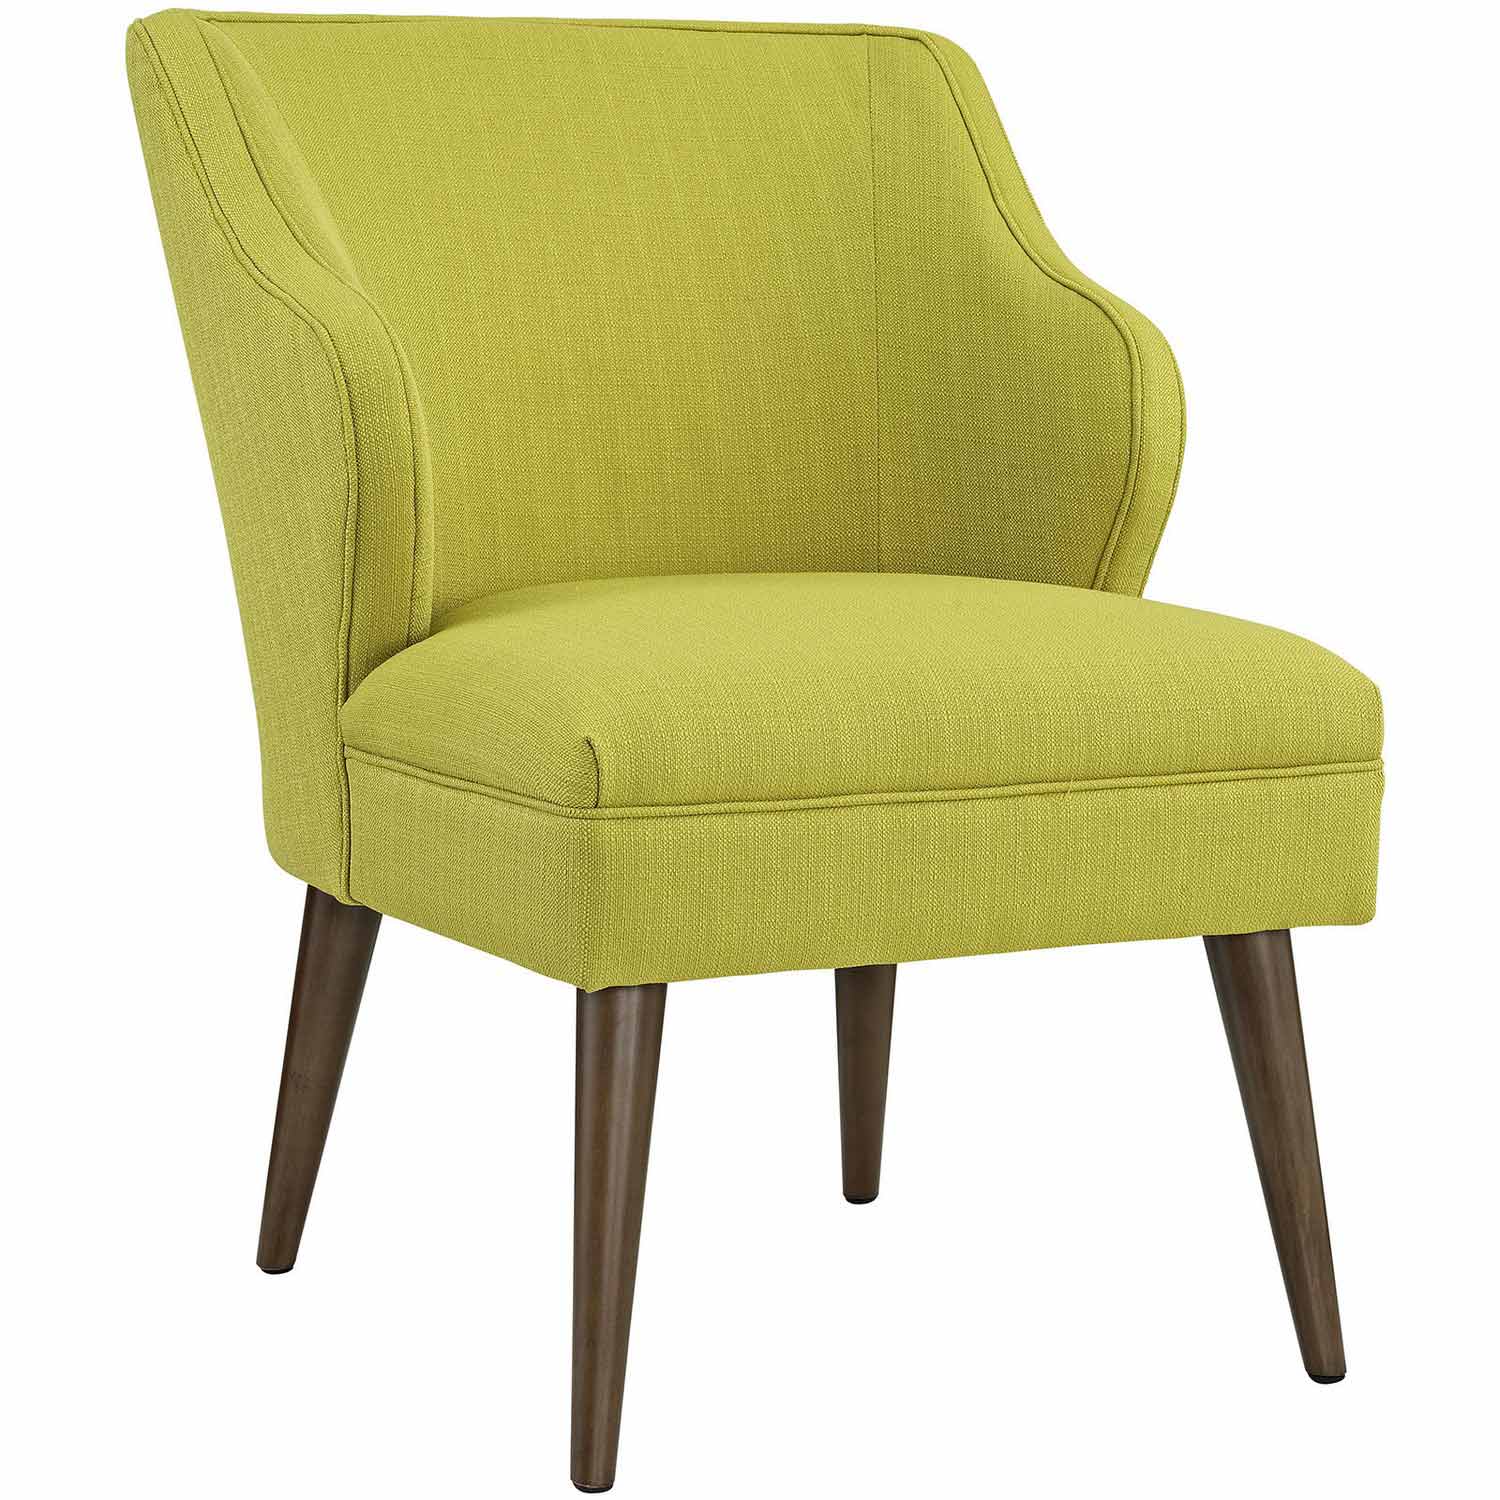 Modway Swell Fabric Arm Chair - Wheatgrass